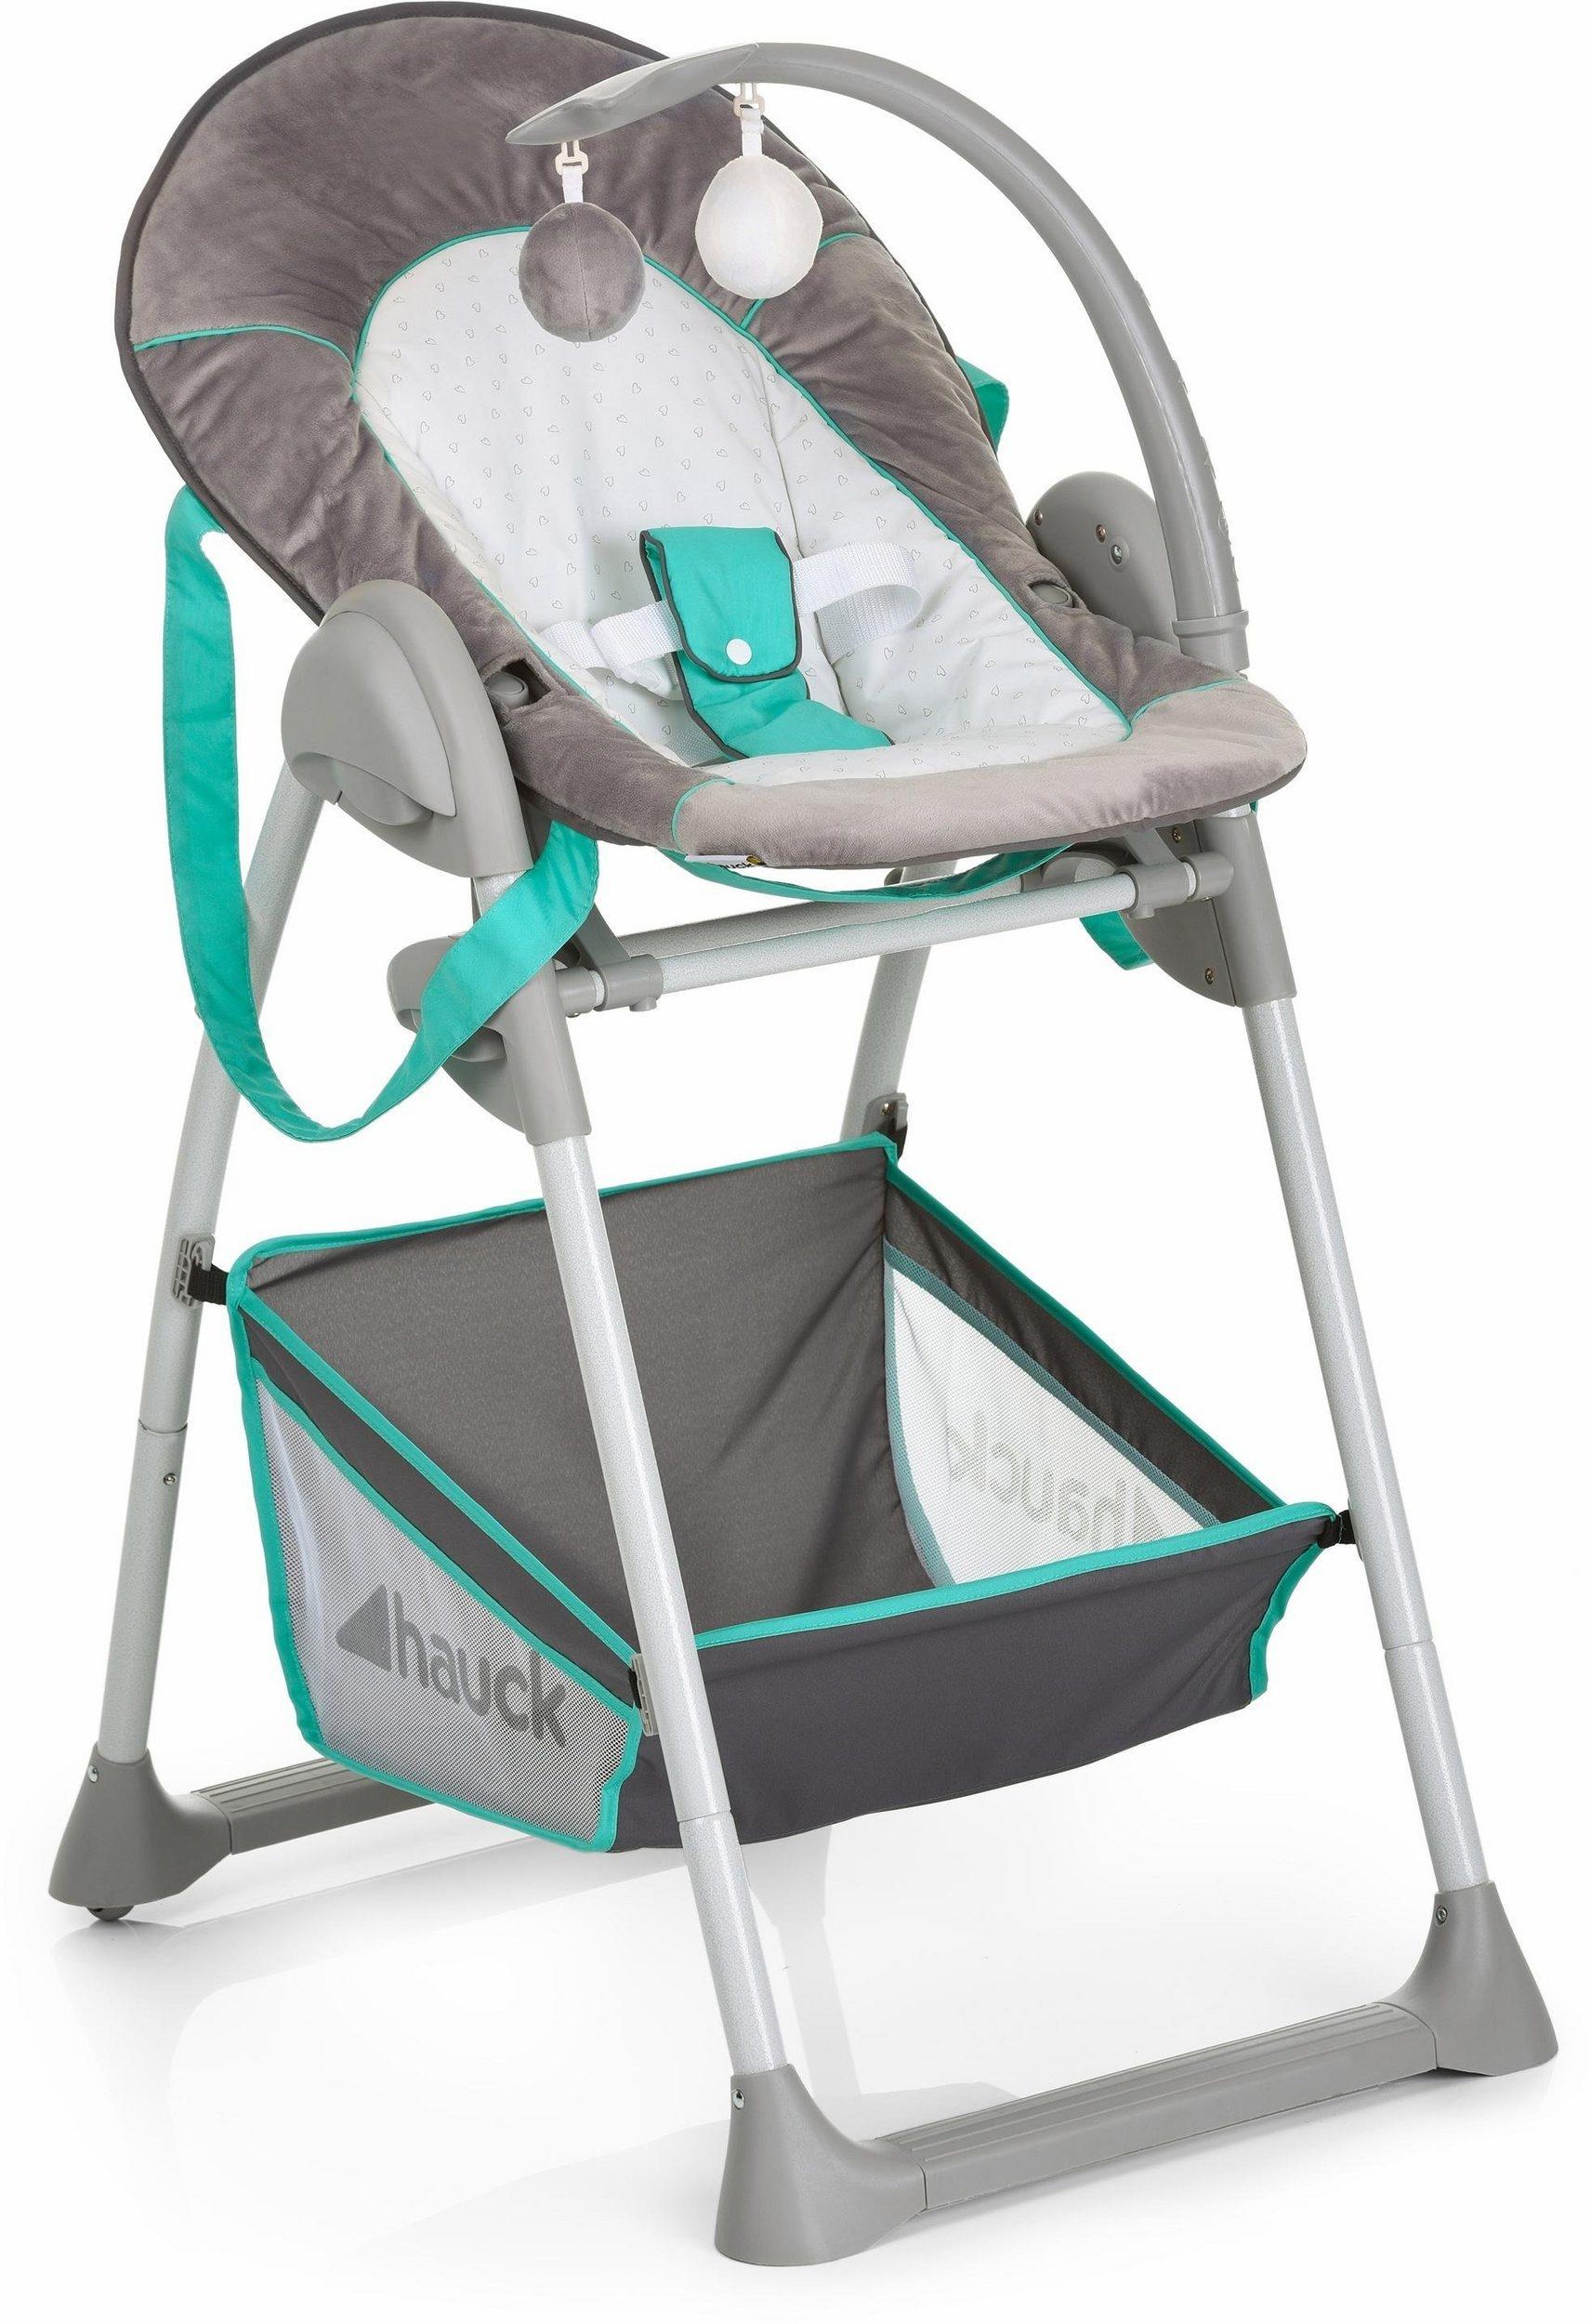 Hauck Sit N Relax Heart grey/turquoise Test - Note: 69/100